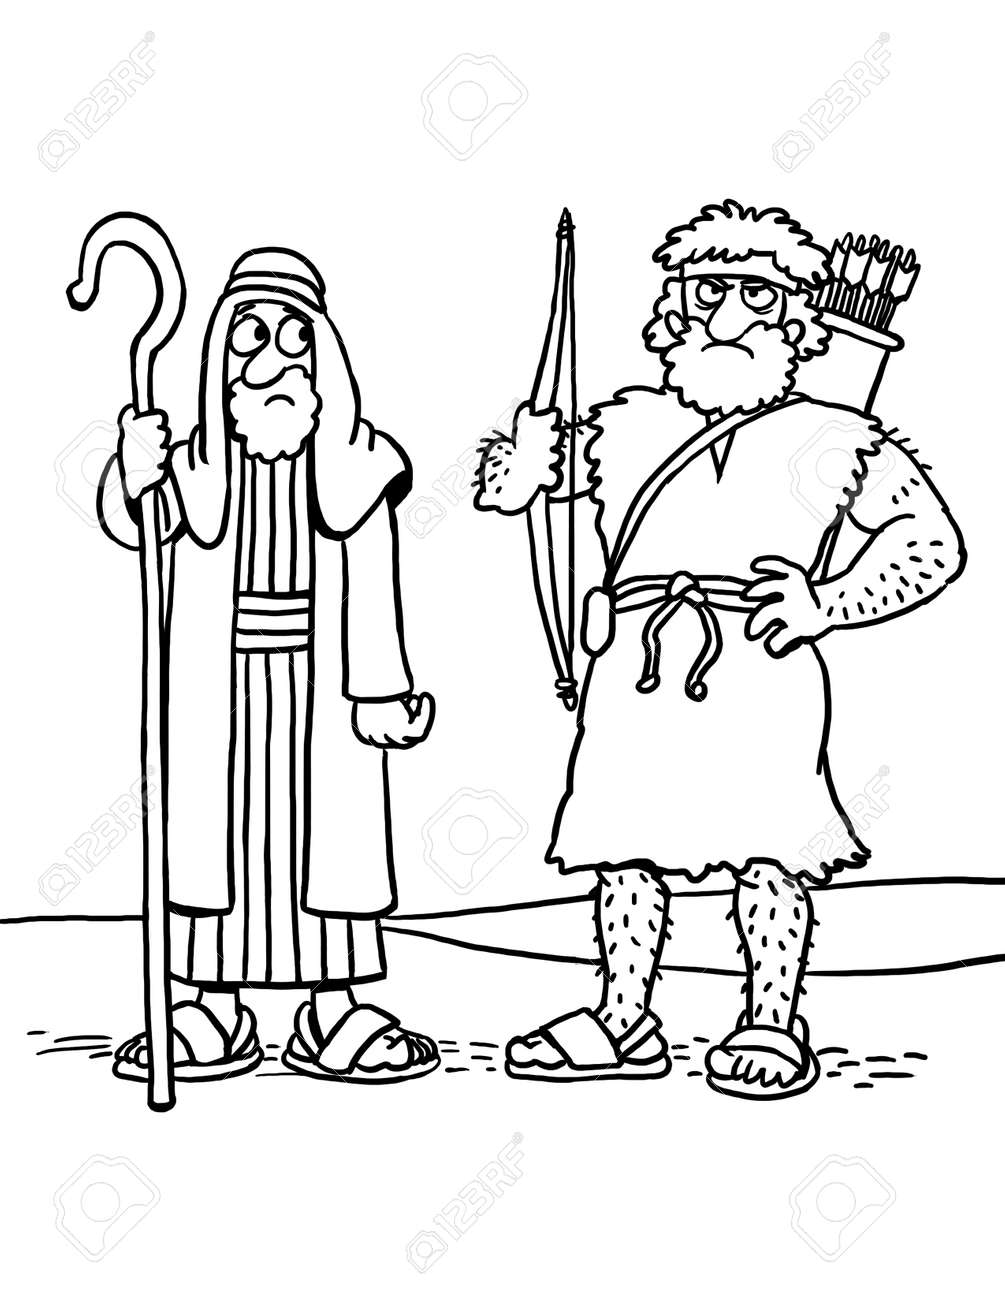 Coloring page of jacob and esau stock photo picture and royalty free image image